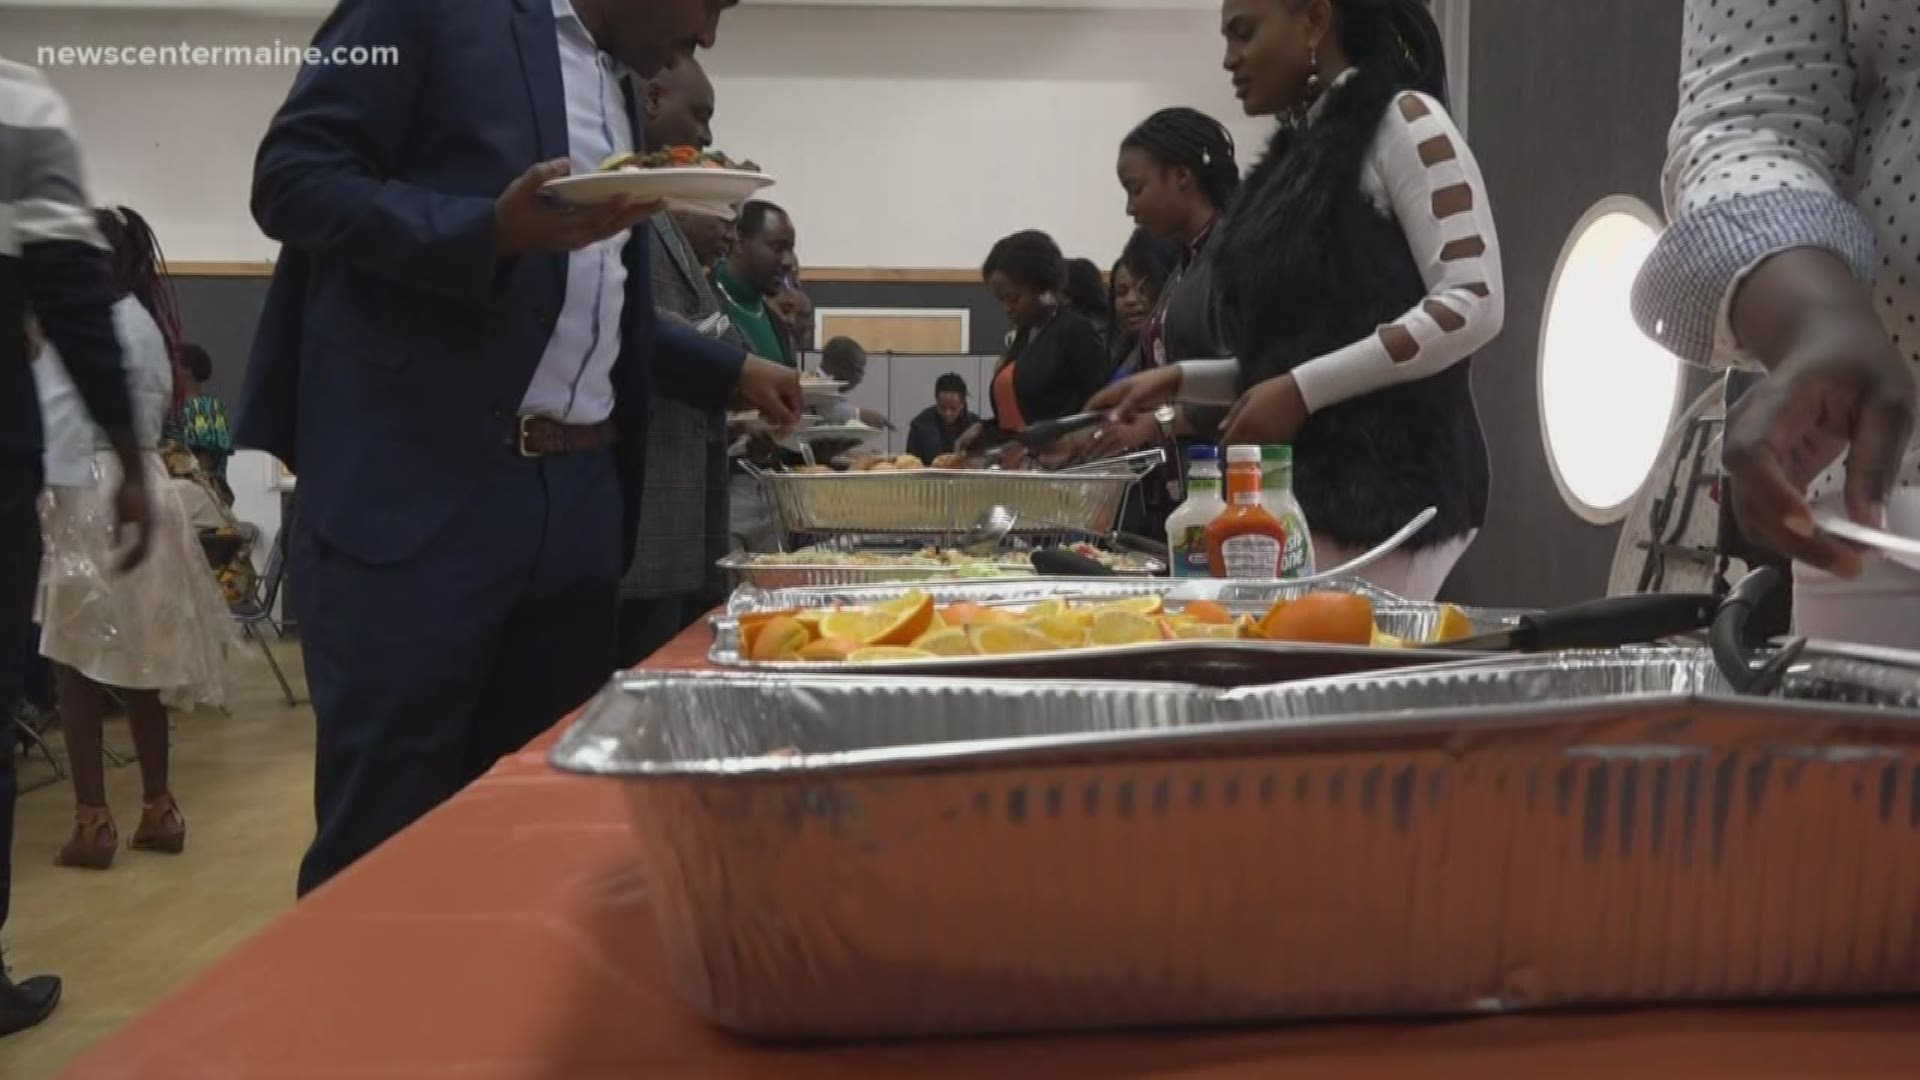 The Bethel Christian Center in Westbrook welcomed asylum seekers and refugees for a thanksgiving feast.